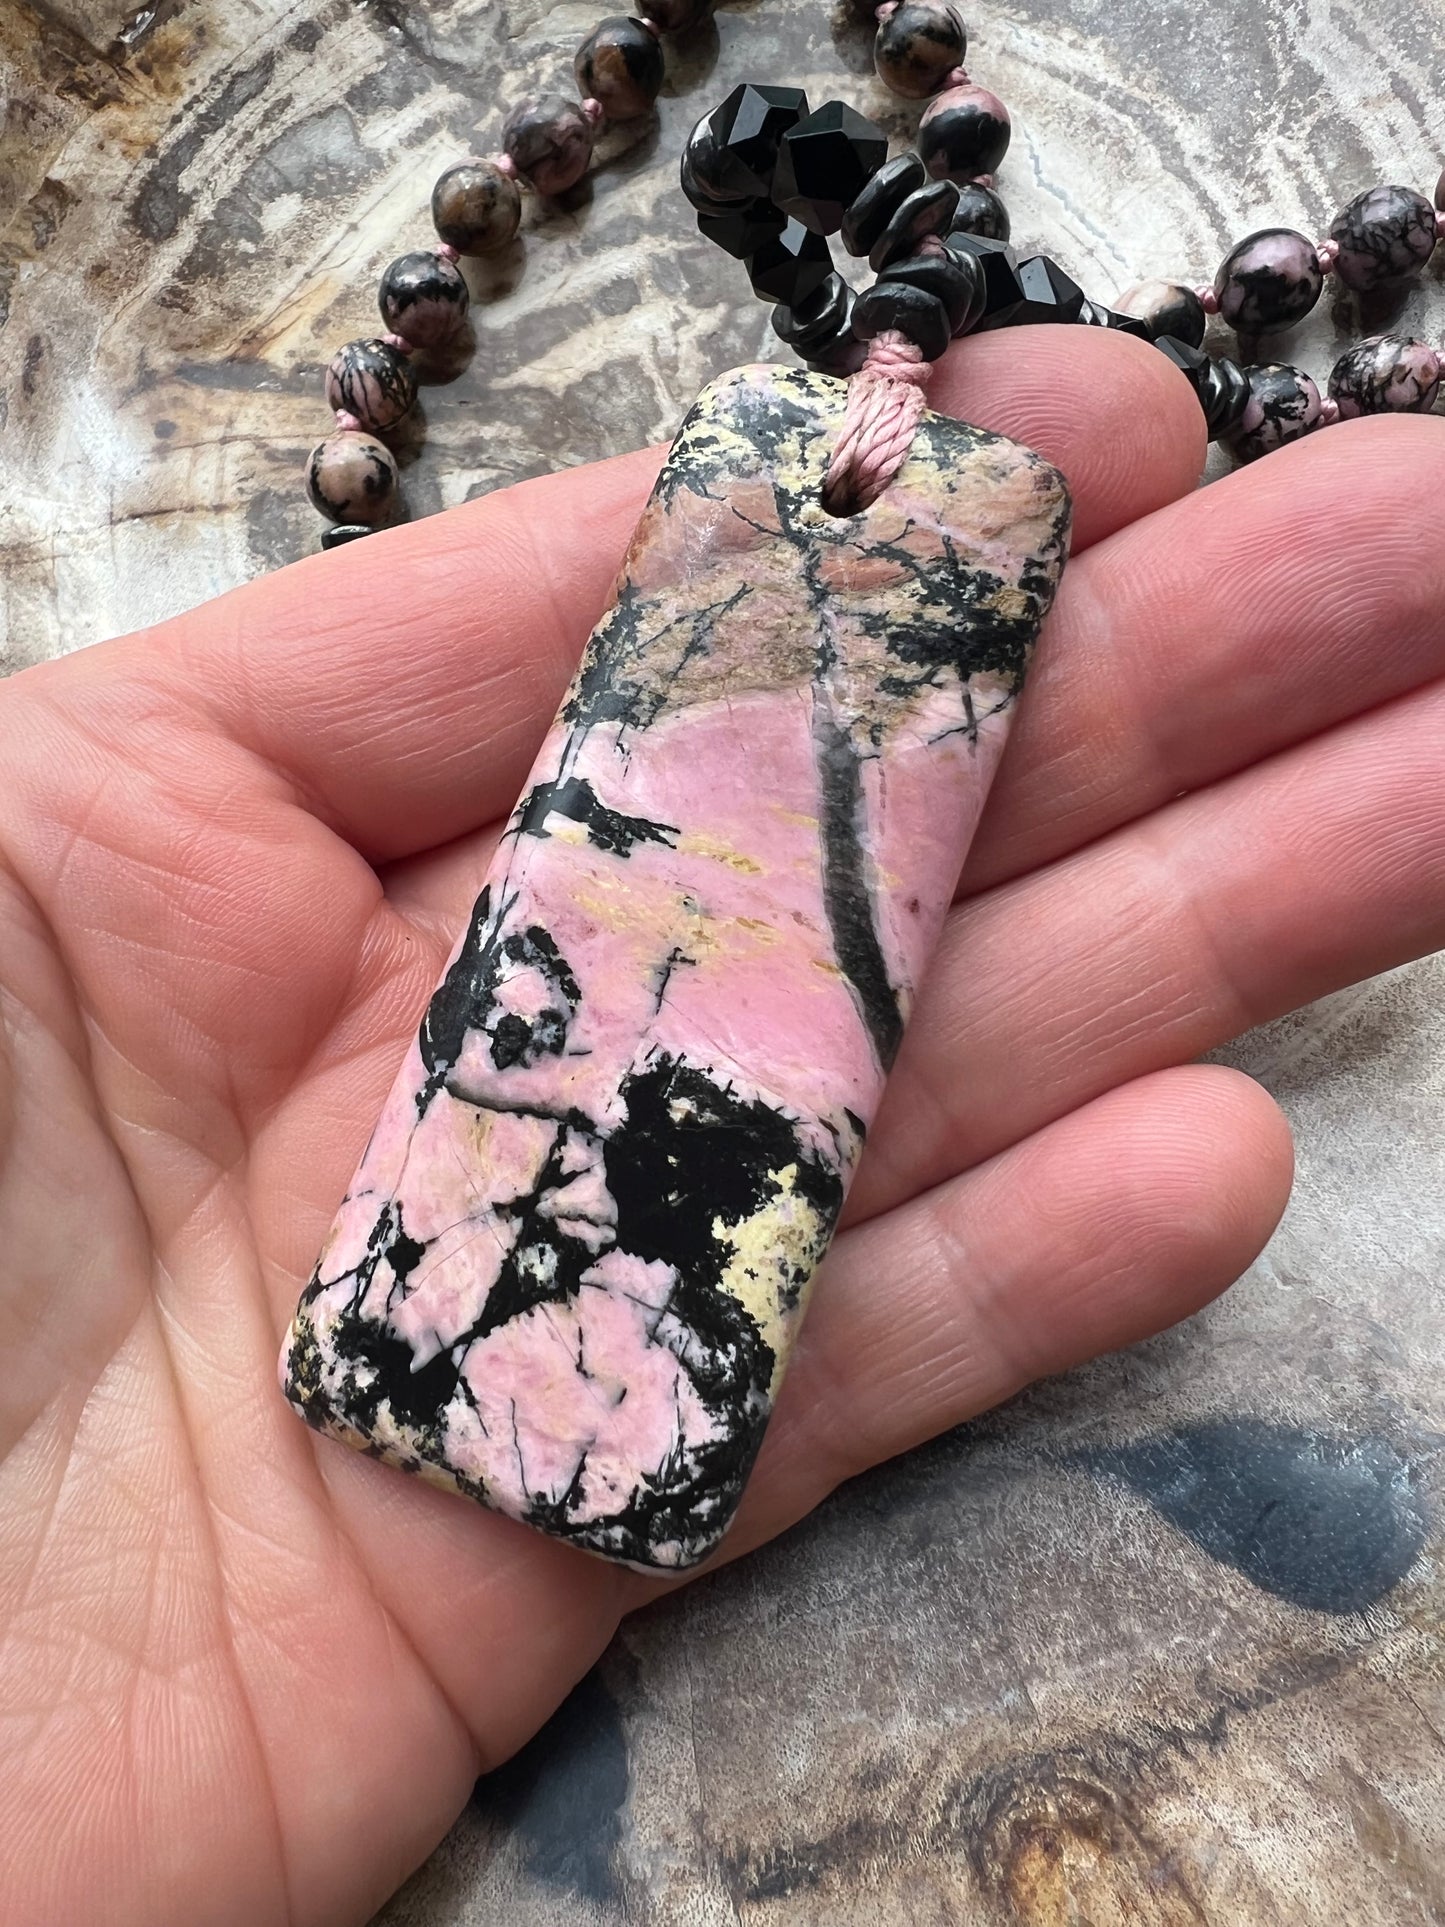 Mālā with Rhodonite Beads and a New Zealand Rhodonite Pendant